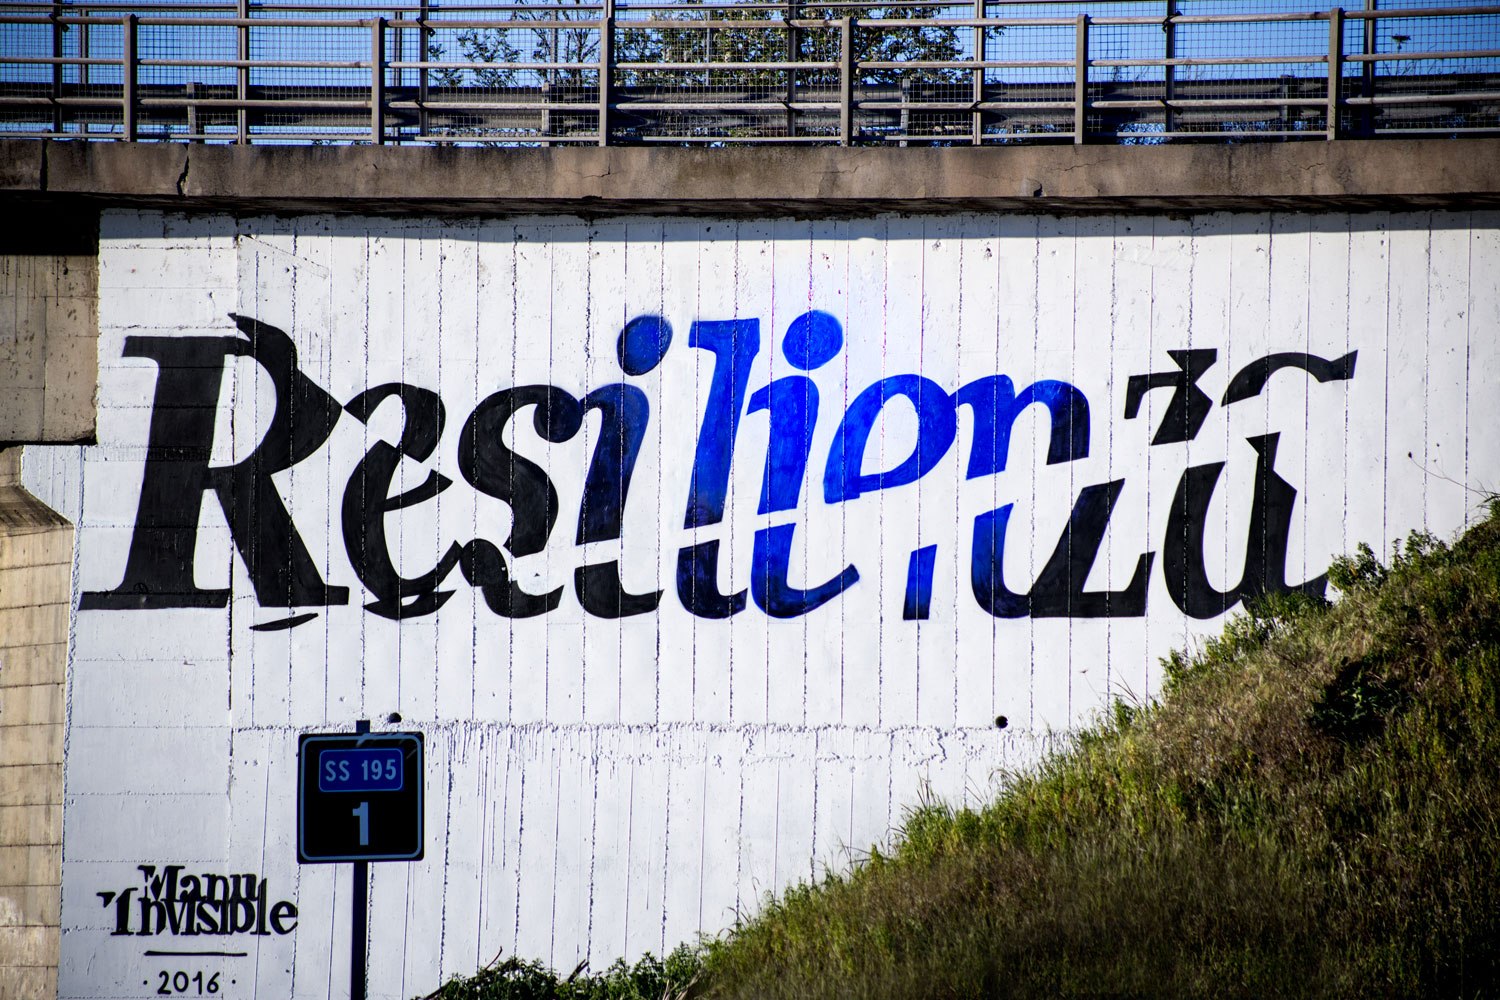 ''Resilienza'' Spray and quartz paint on wall 8 x 4,5 m – Cagliari ss. 195 - 2016